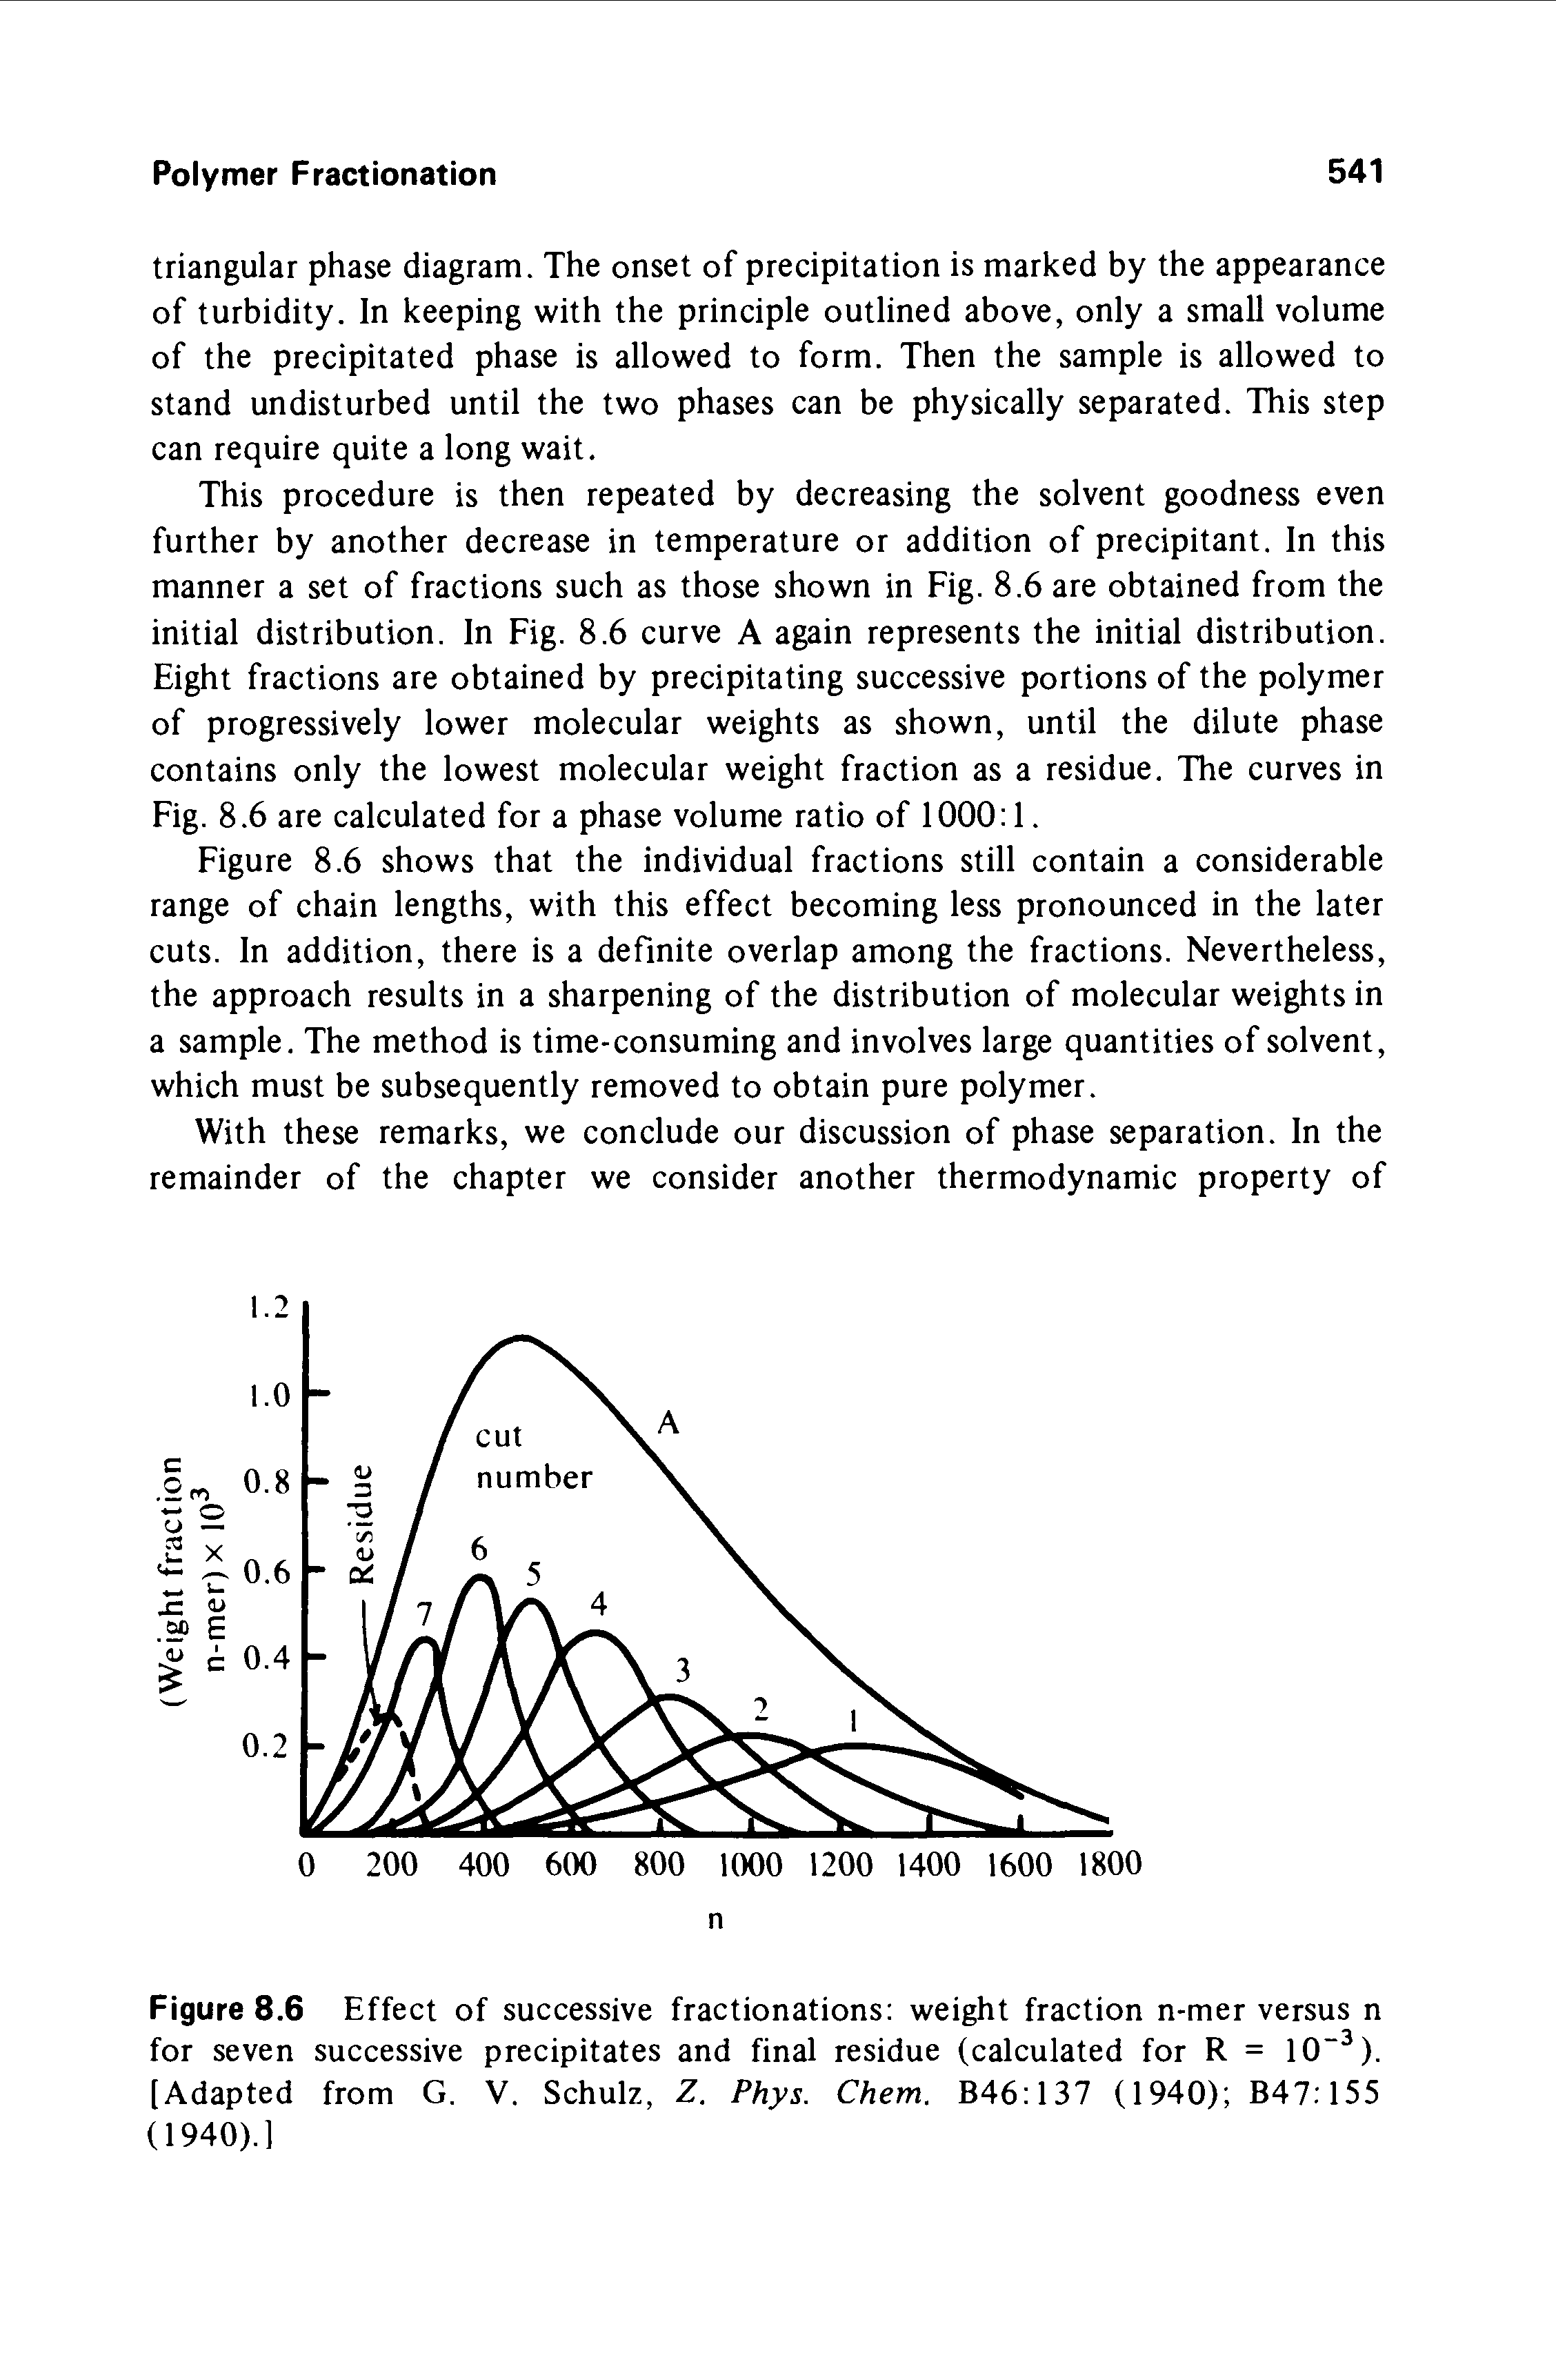 Figure 8.6 Effect of successive fractionations weight fraction n-mer versus n for seven successive precipitates and final residue (calculated for R = 10 ). [Adapted from G. V. Schulz, Z. Phys. Chem. B46 137 (1940) B47.155 (1940).]...